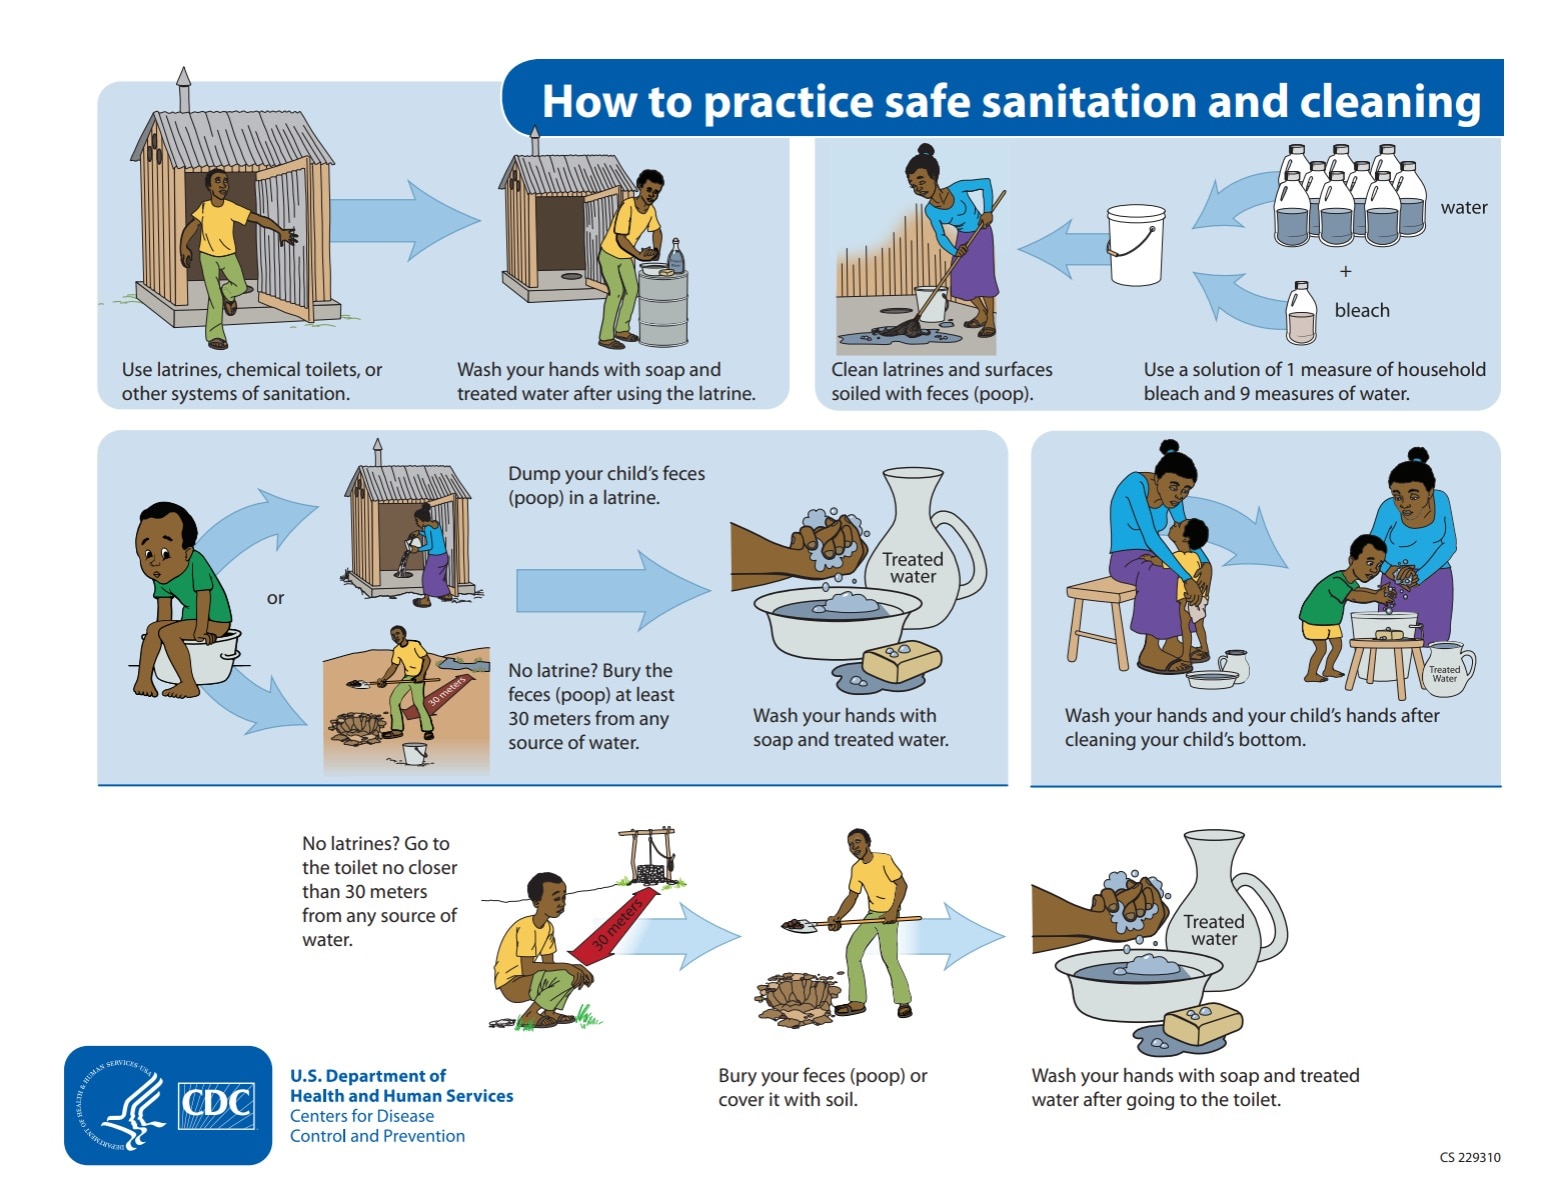 thumbnail image of "how to practice safe sanitation and cleaning (africa)"